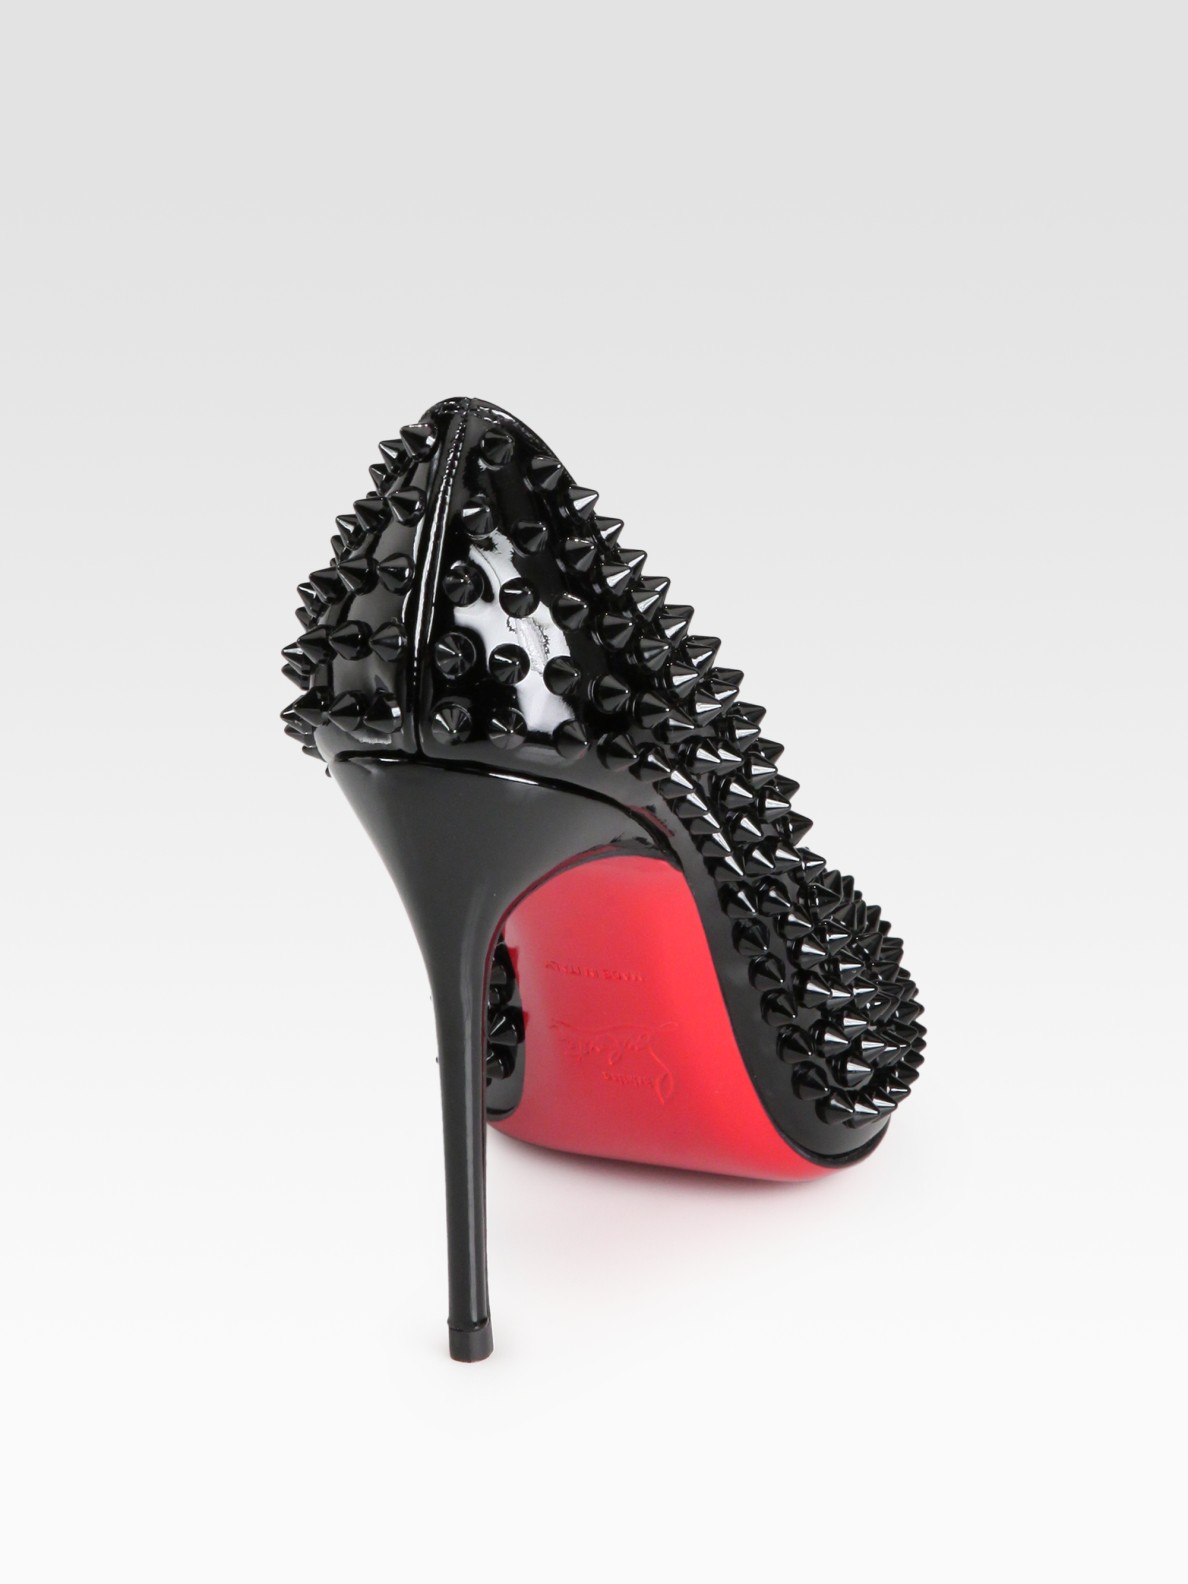 Christian Louboutin Fifi Spiked Patent Leather Pumps in Black - Lyst